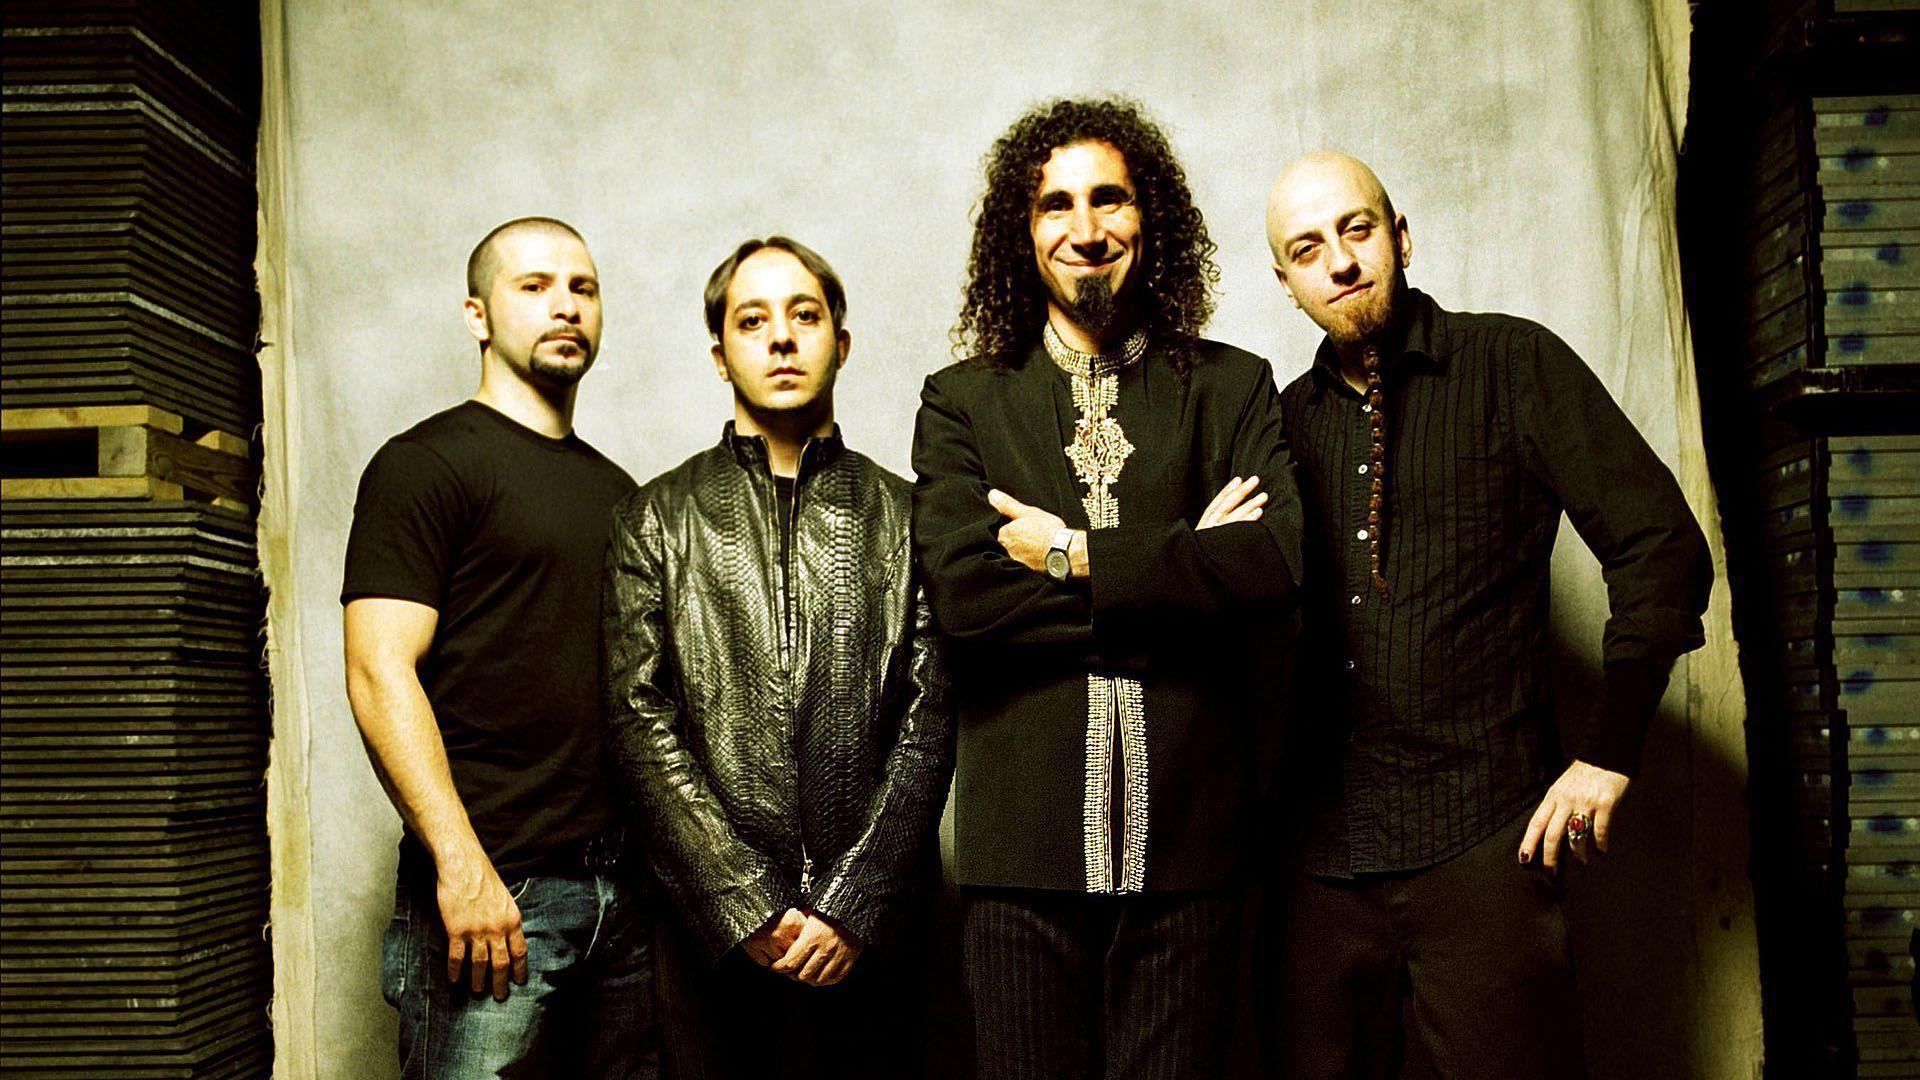 system of a down wallpaper 9 - Image And Wallpaper free